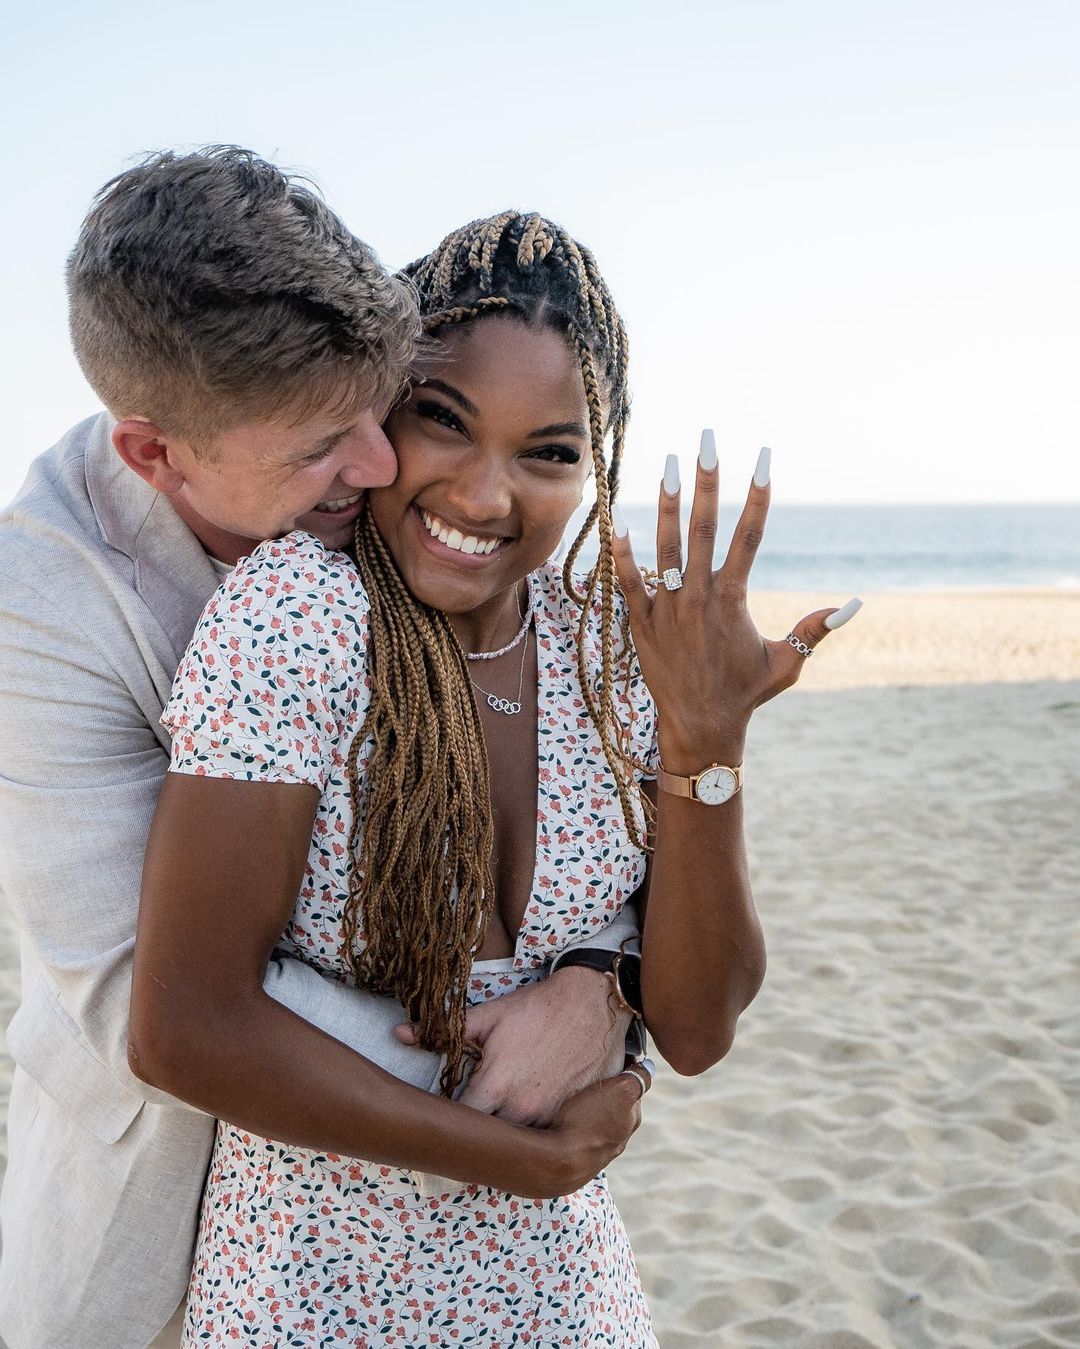 Hunter Woodhall and Tara Davis got engaged in September 2021 and had a wedding in October 2022.